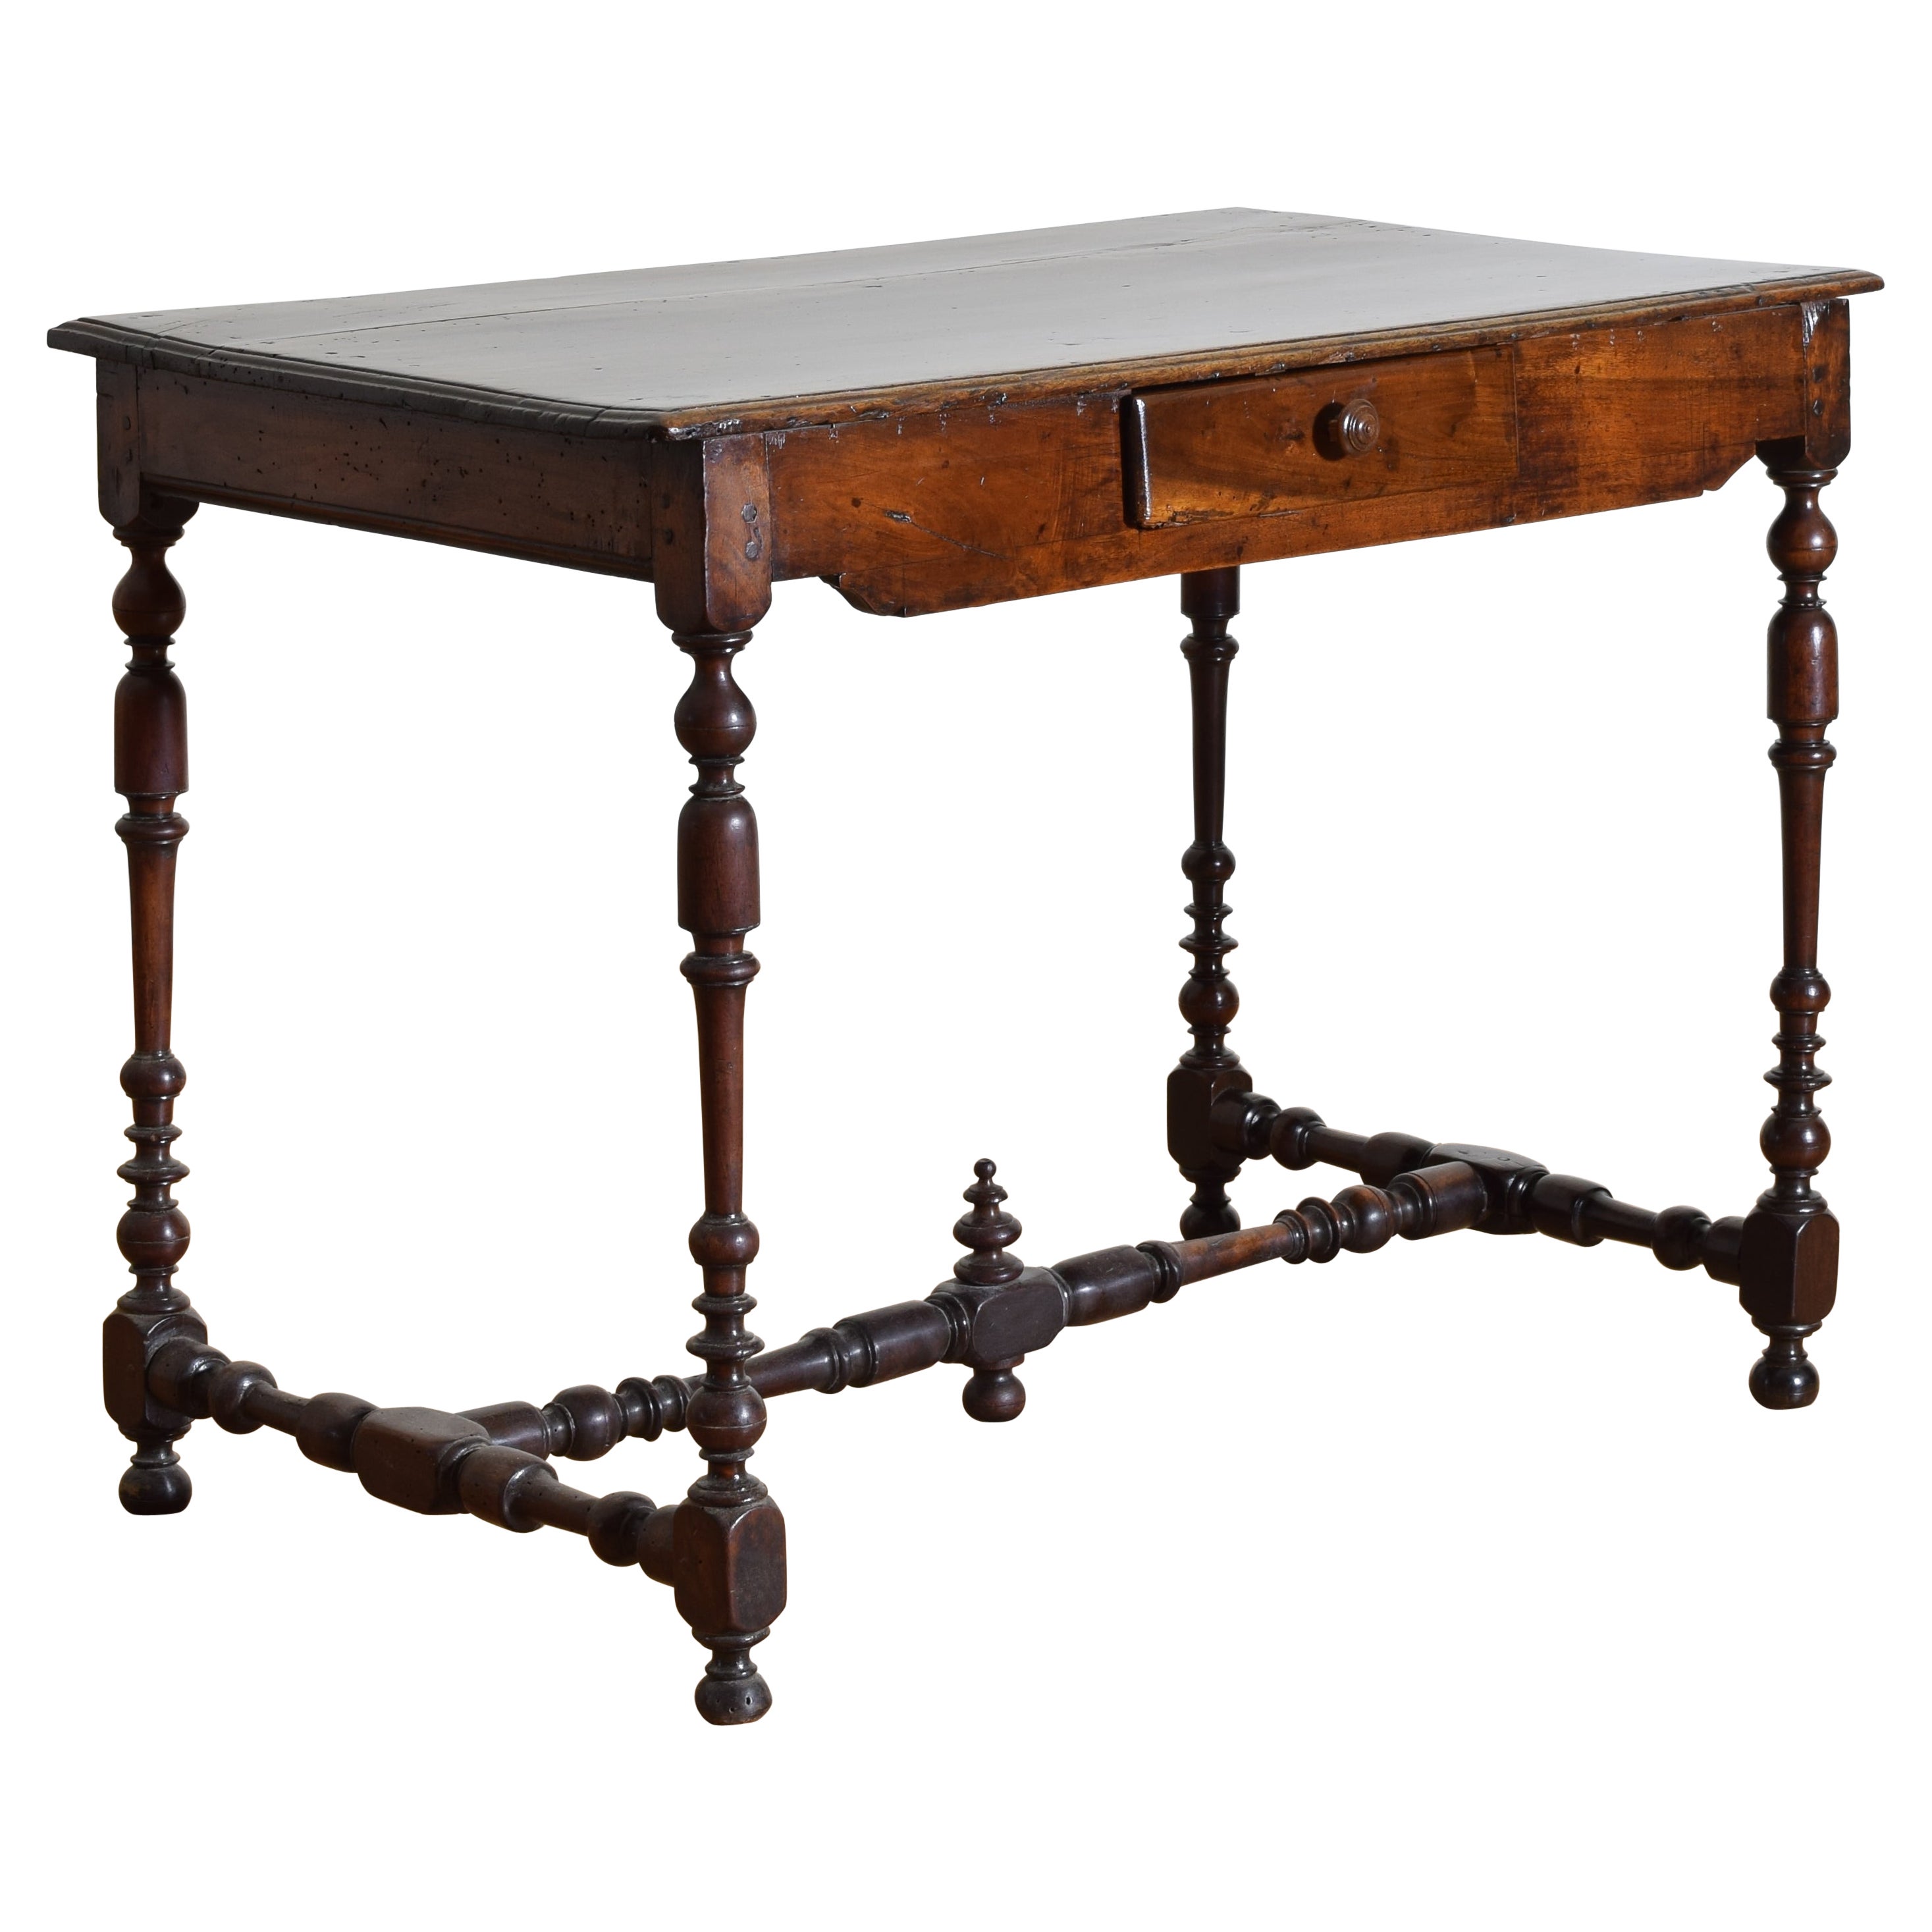 French Louis XIV Period Turned Walnut 1-Drawer Table, 1st quarter 18th century